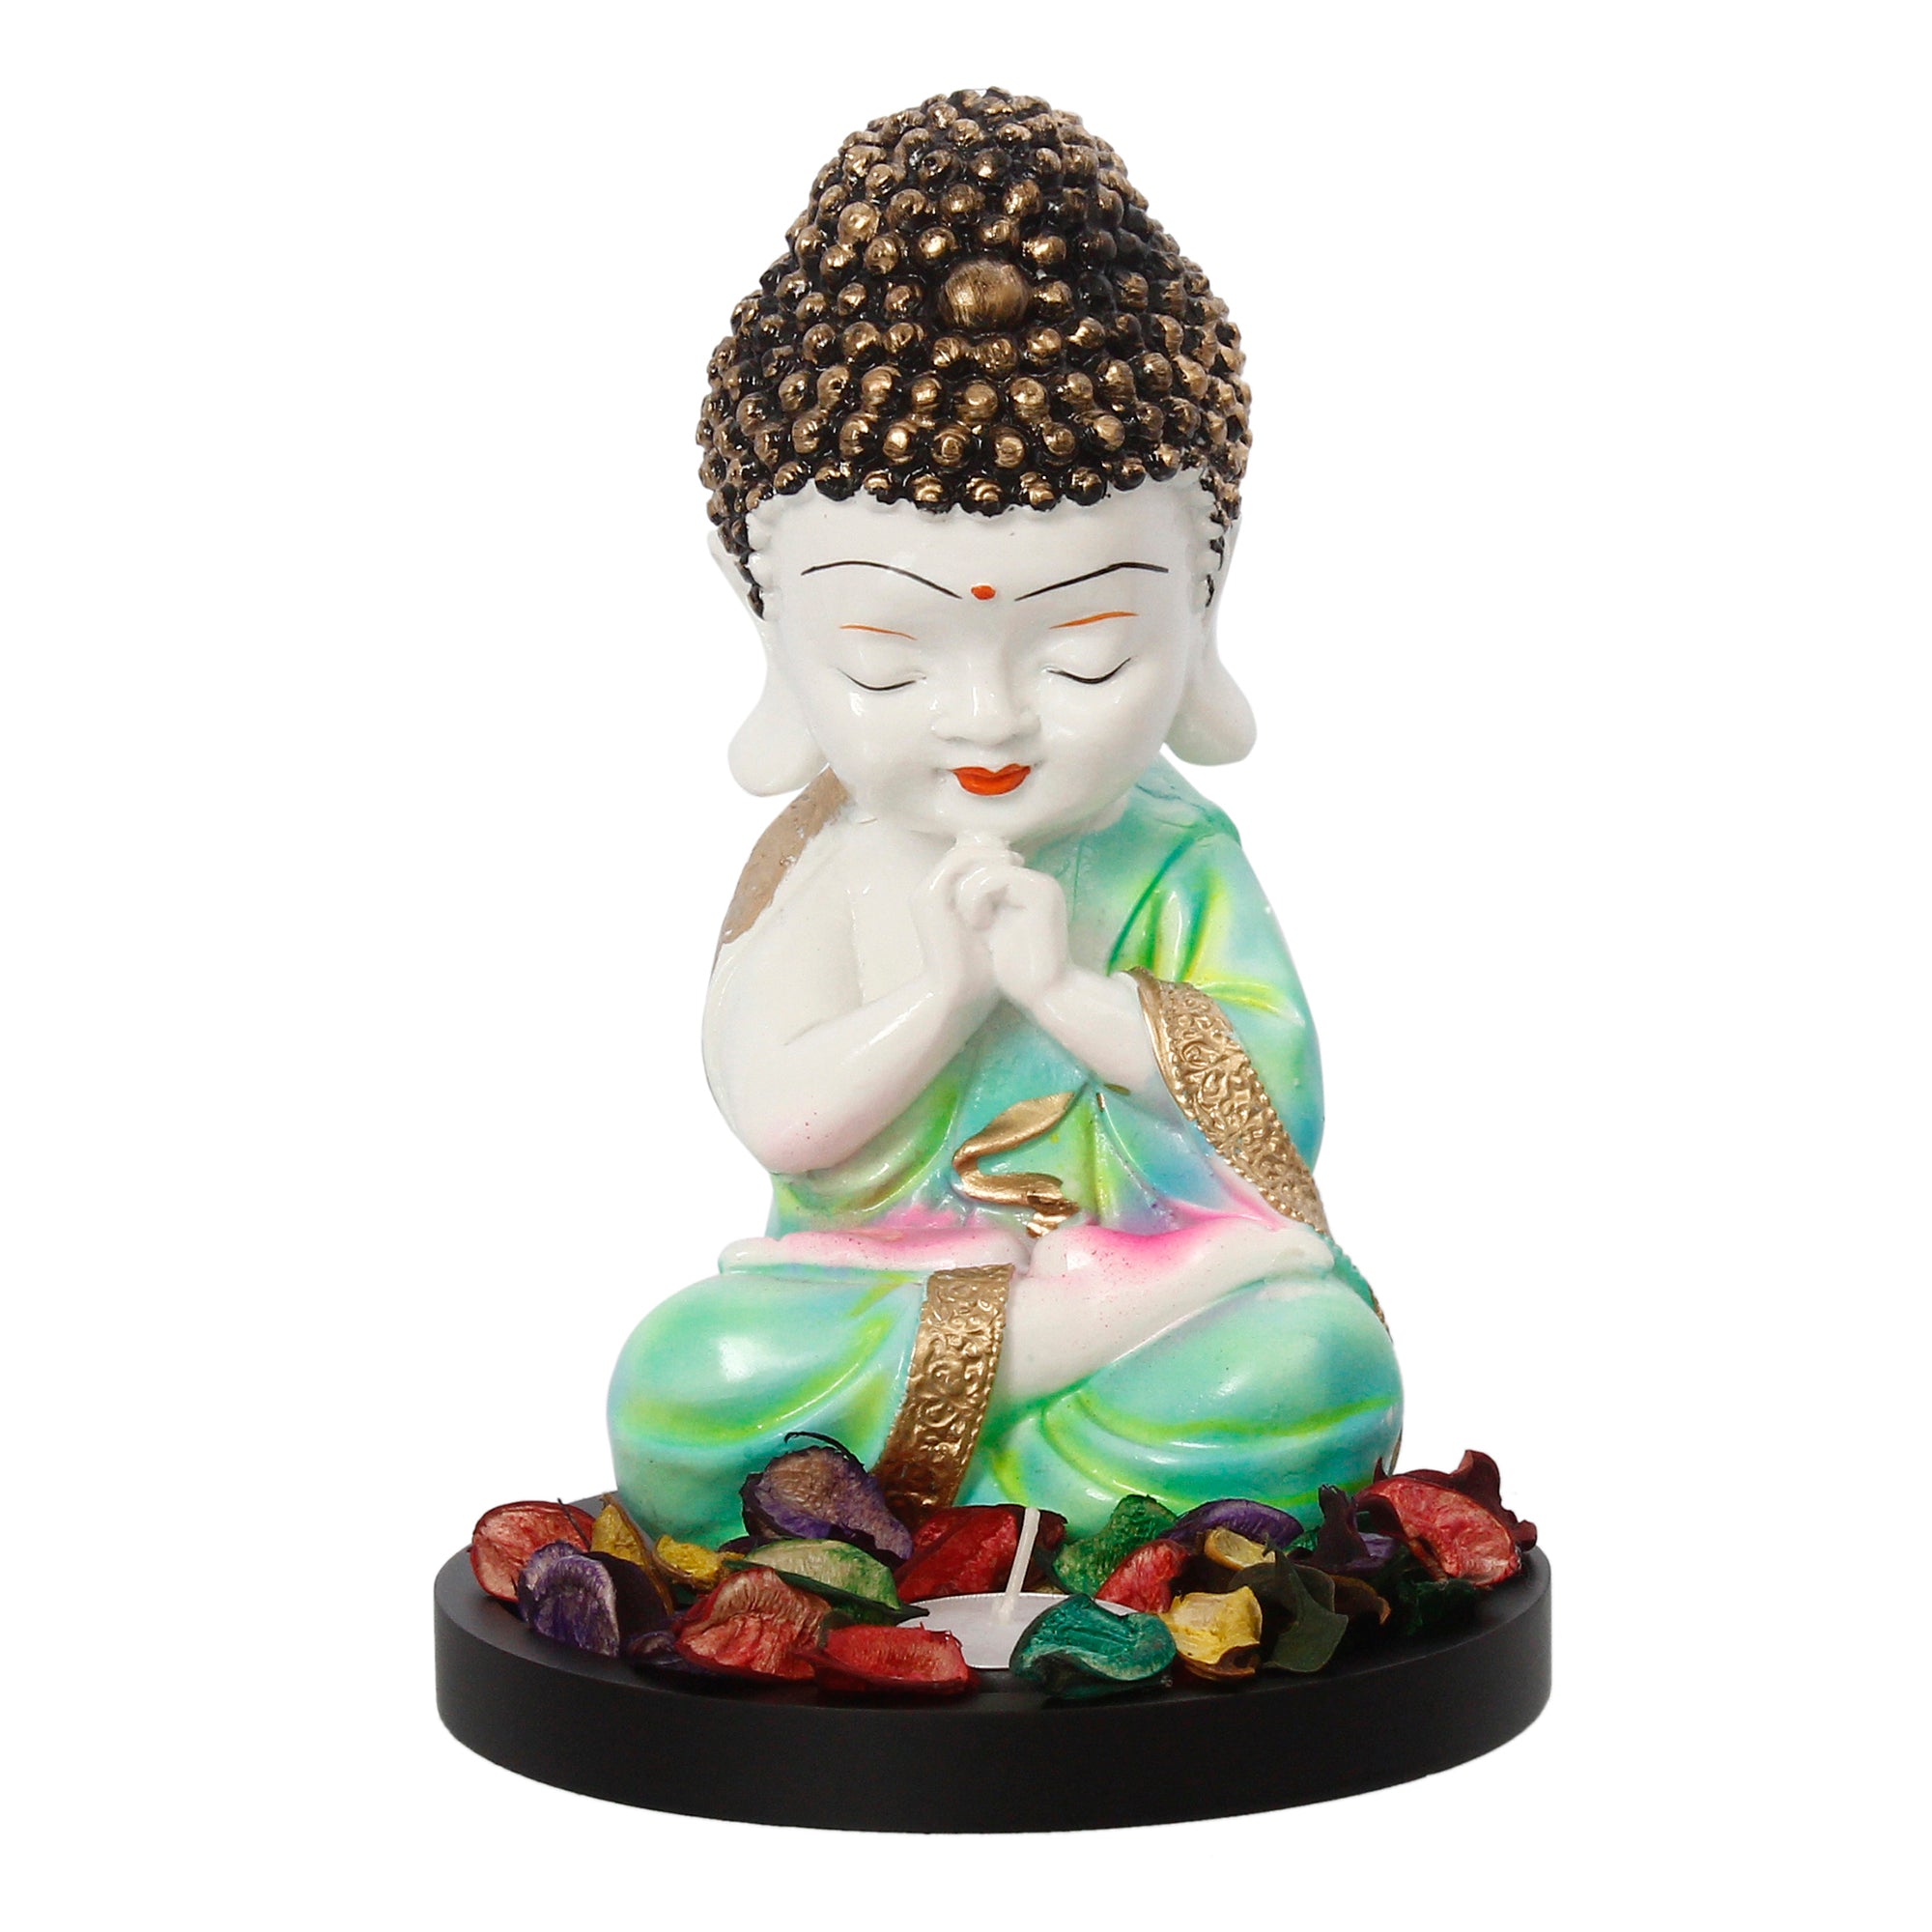 Polyresin Green and White Praying Monk Buddha Statue with Wooden Base, Fragranced Petals and Tealight 2